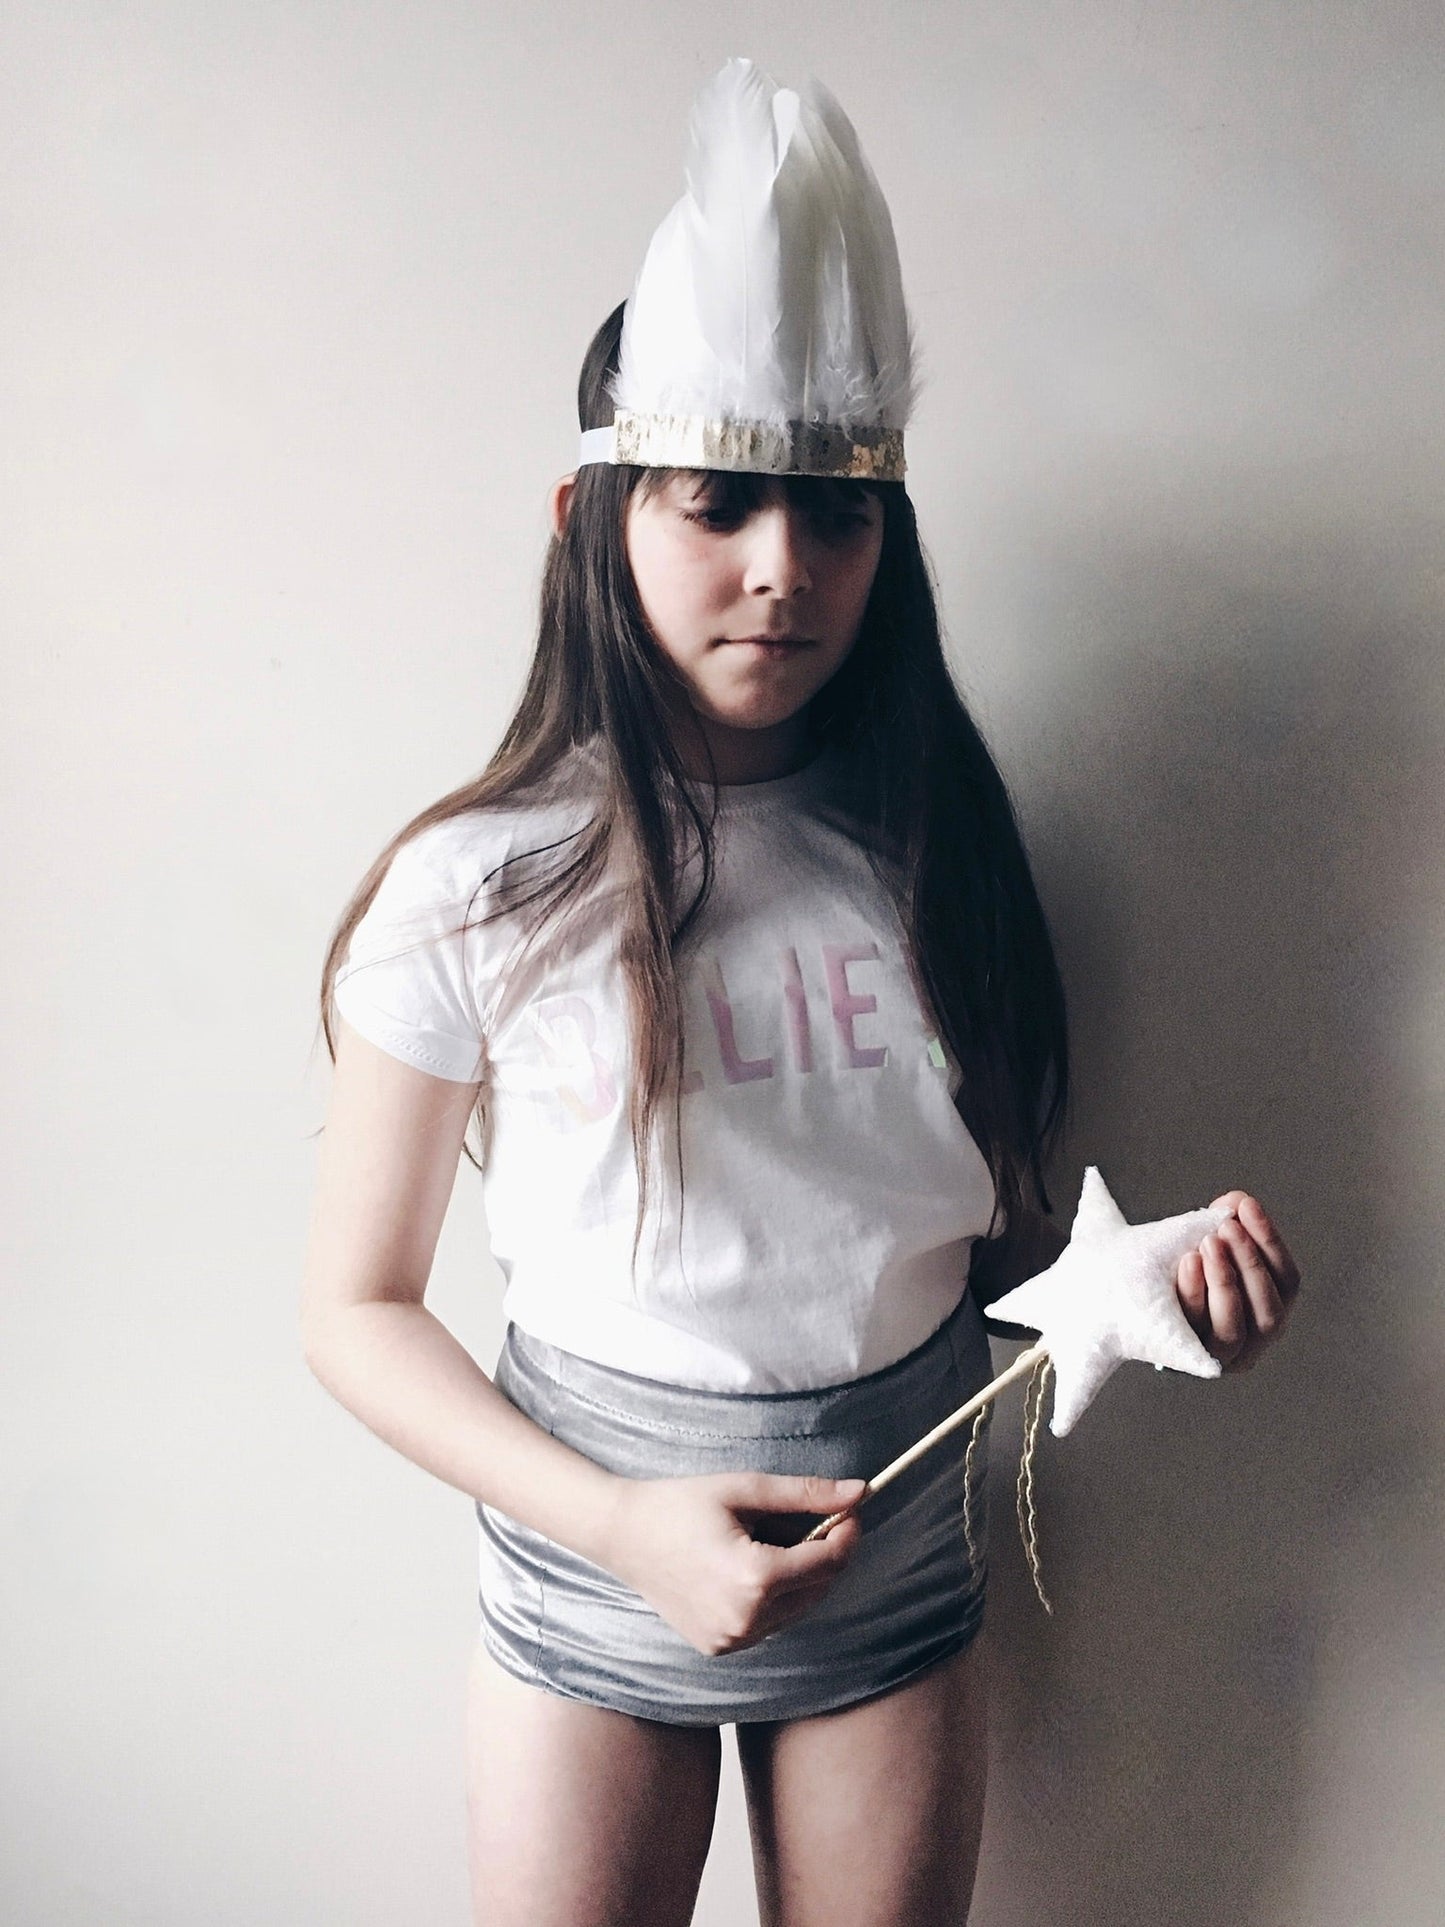 Child with long dark hair holding a star wand.  Wearing a white Believe t-shirt, feather headdress and grey shorts by For Just ONE Day